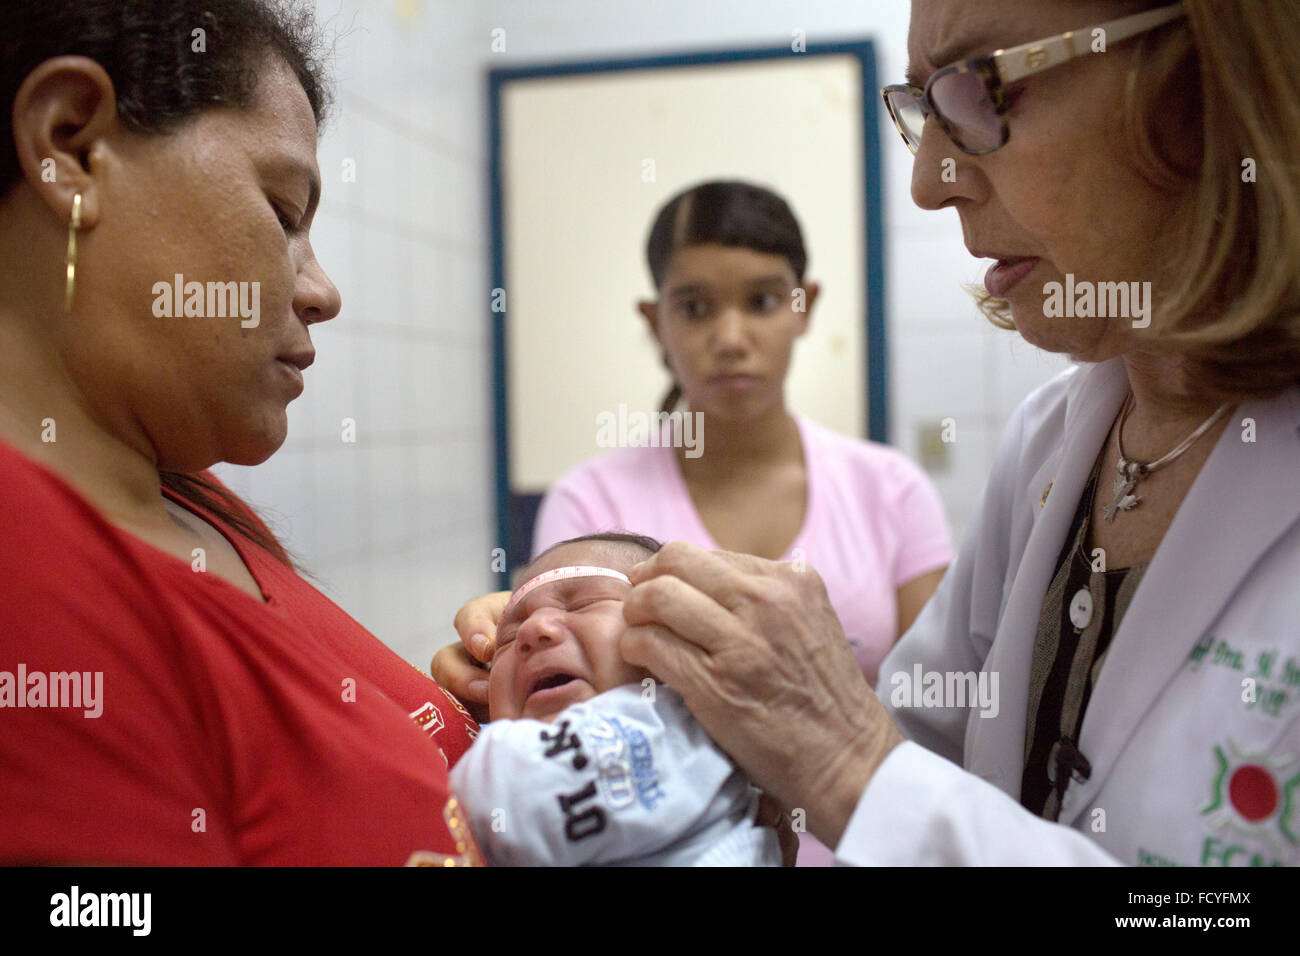 Recife, Brazil. 21st Jan, 2016. Physician Angela Rocha (R) measures the head circumference of one-month-old Alexandro Julio who is held by his grandmother in the presence of his 16-year-old mother Julie Adriana (C) at the Oswaldo Cruz Hospital in Recife, Brazil, 21 January 2016. The baby suffers from microcephaly, which results in an unusually small head circumference and impaired brain function. The Zika virus transmitted by mosquitos to pregnant women is suspected of causing these issues. Brazil alone is reporting nearly 3900 cases. Photo: RAFAEL FABRES/dpa/Alamy Live News Stock Photo